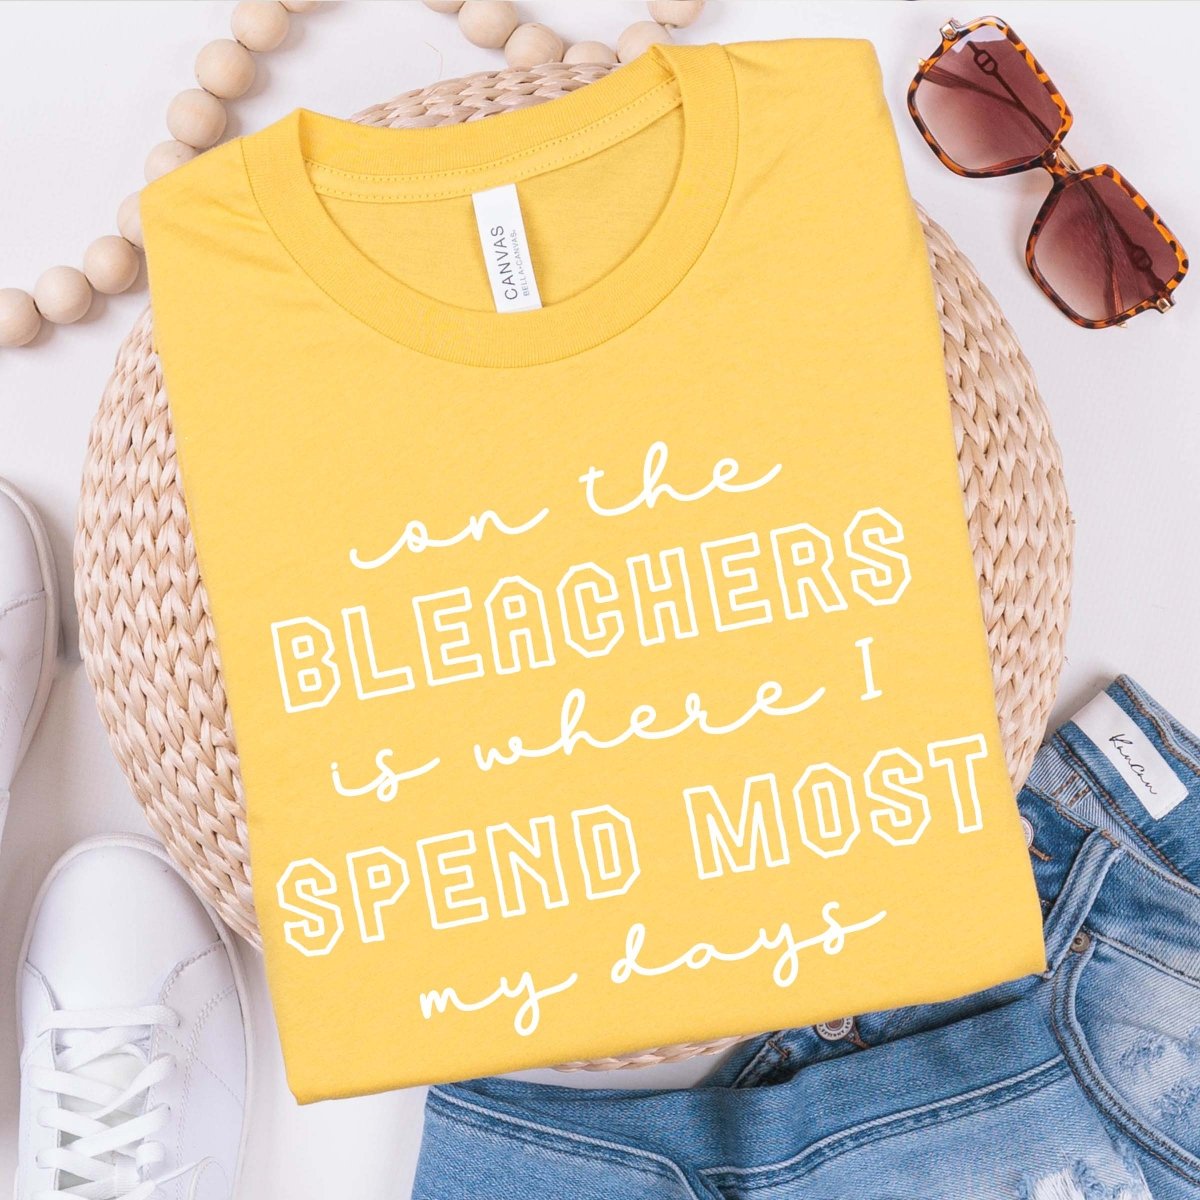 Bleachers Spend Most of my days Tee - Limeberry Designs